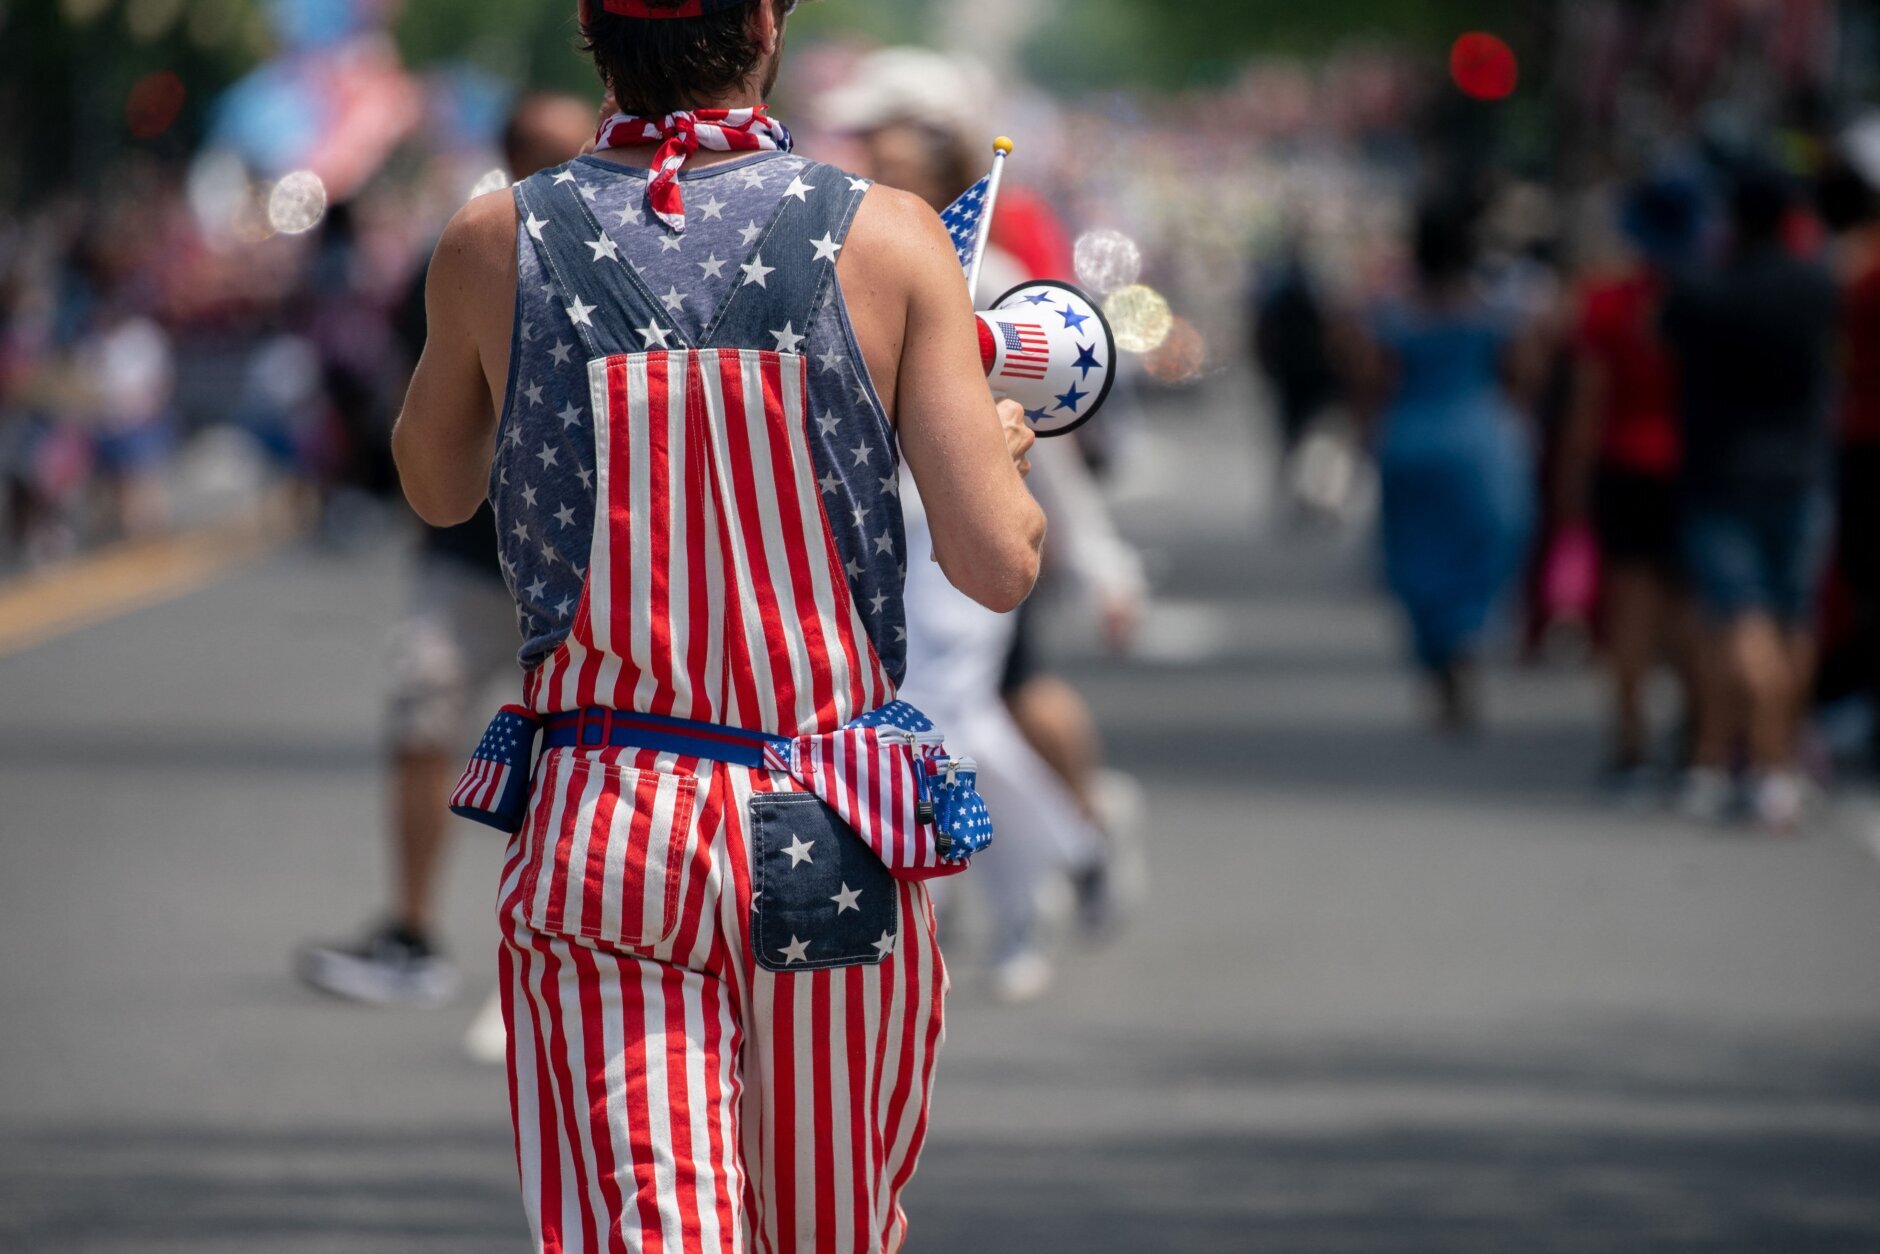 DC area welcomes thousands for Fourth of July celebrations - WTOP News